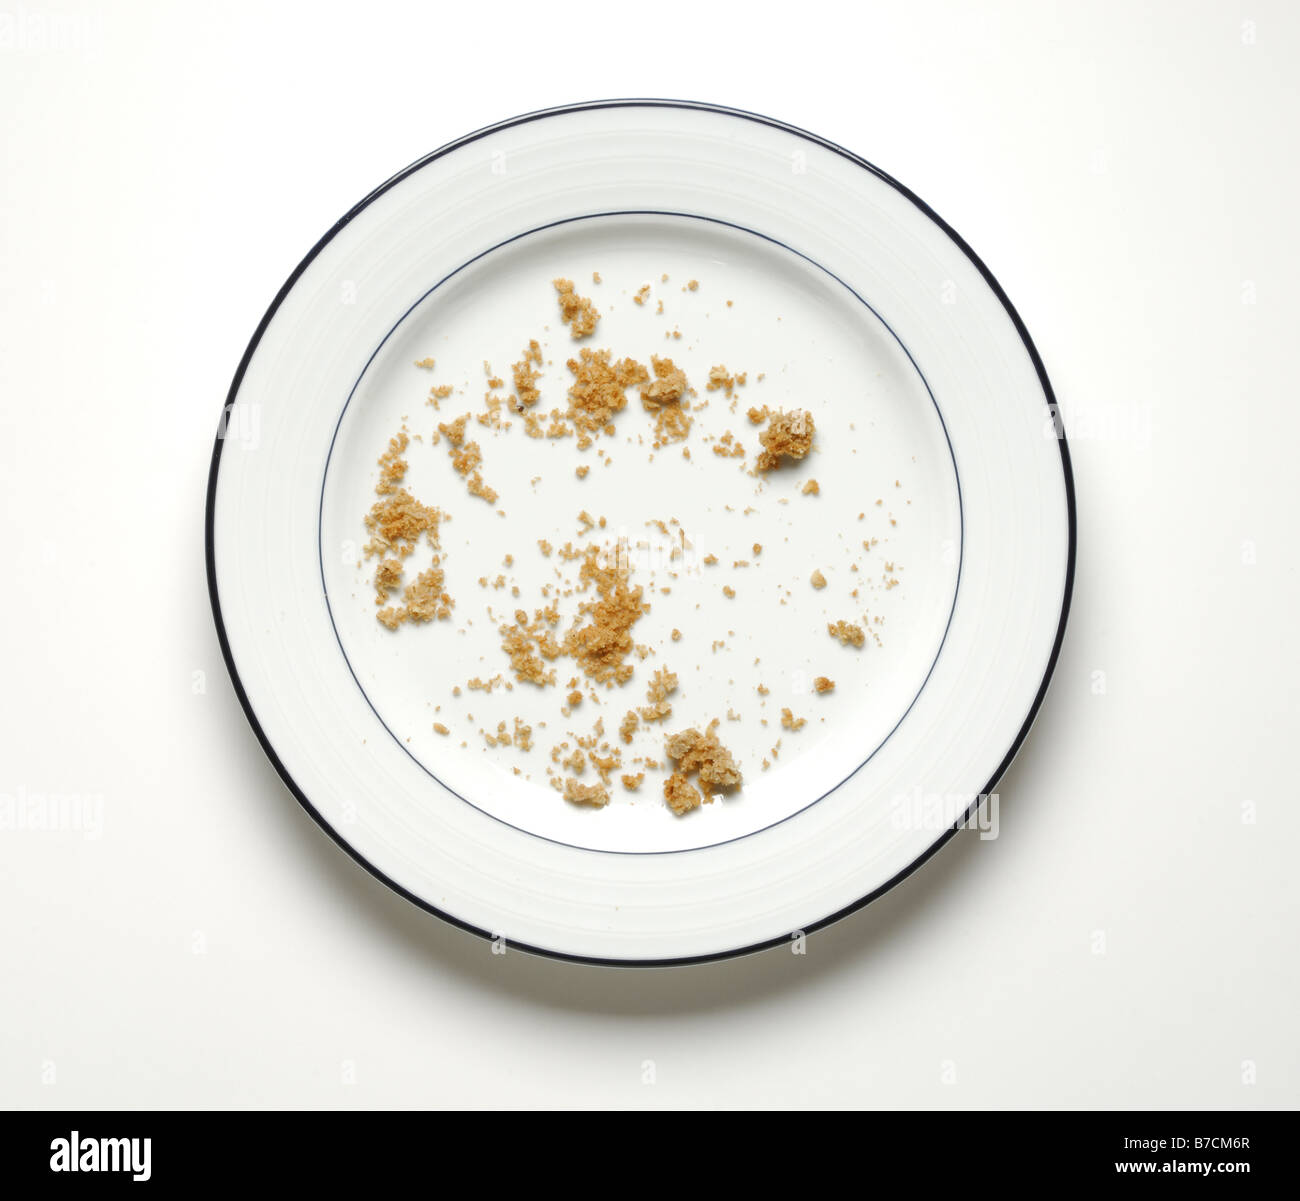 Crumbs of food on a round dinner plate Stock Photo